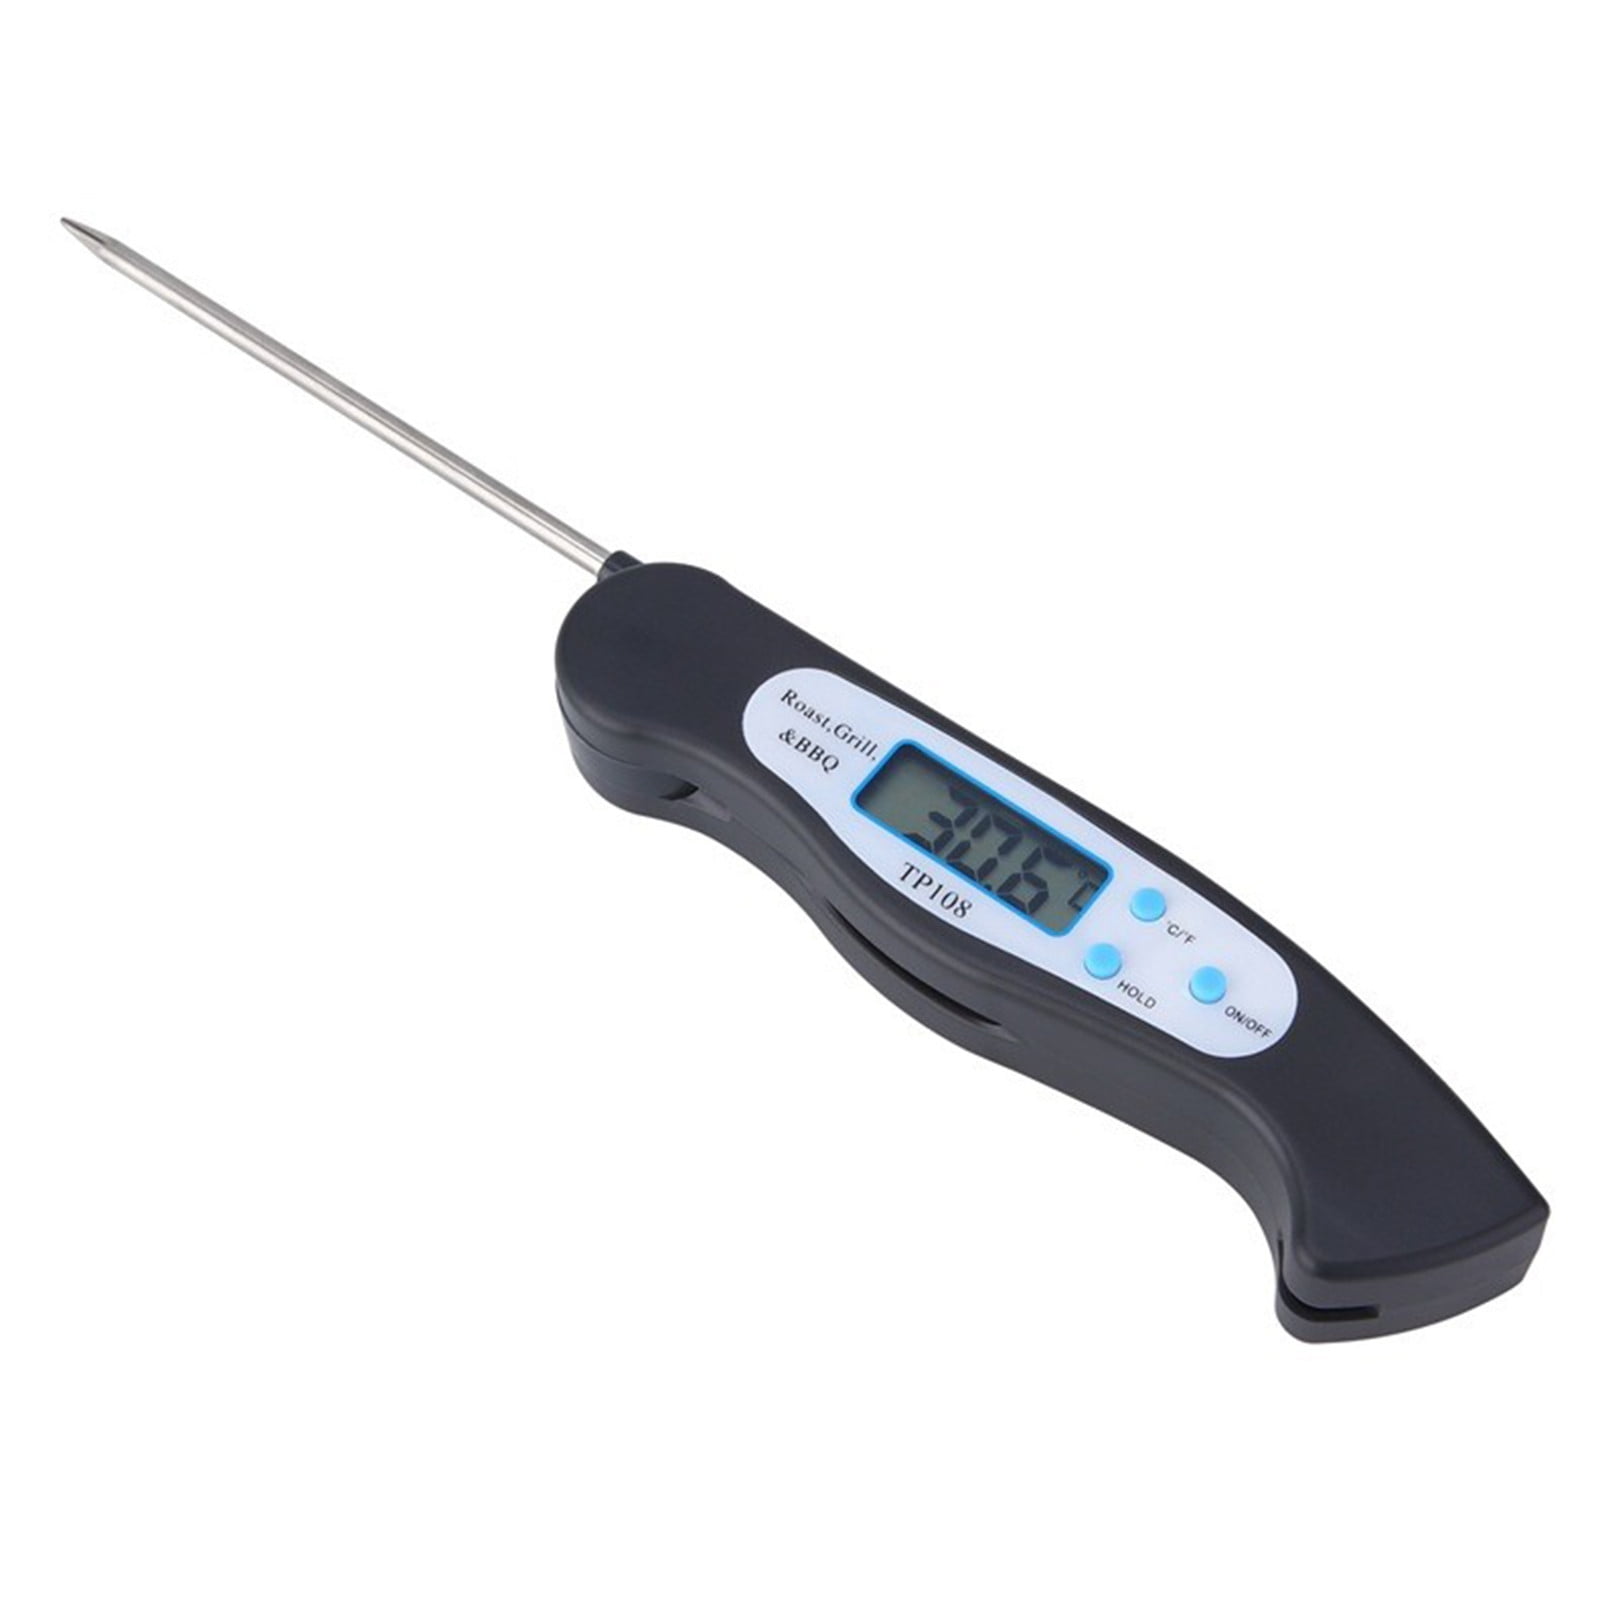 Digital Thermometers Waterproof Digital Instant Read Thermometers